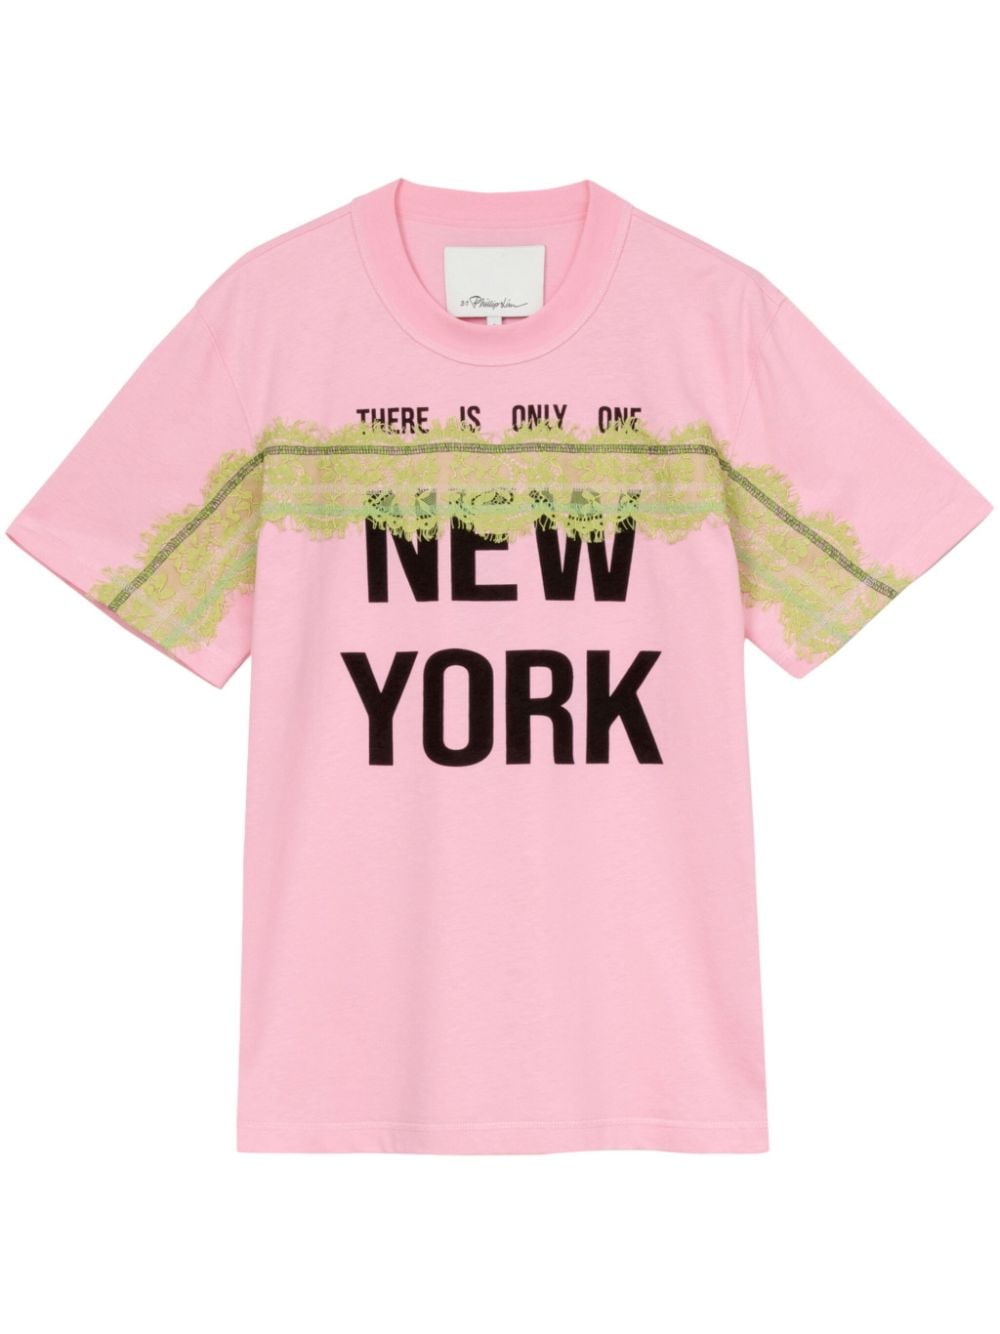 3.1 Phillip Lim There Is Only One NY cotton T-shirt - Pink von 3.1 Phillip Lim